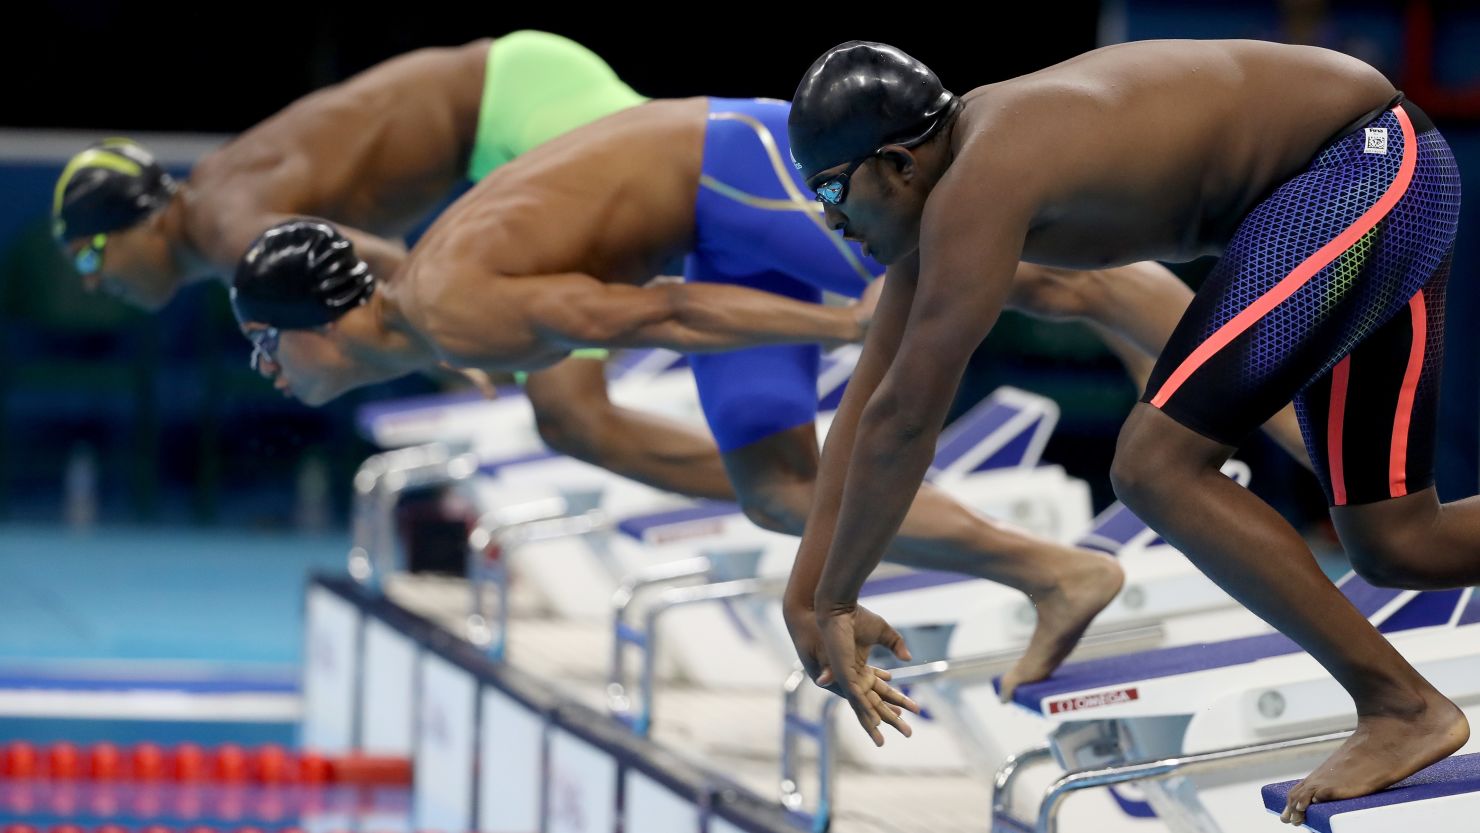 Robel Habte of Ethiopia competes in the Men's 100m Freestyle heat on Day 4 of the Rio 2016 Olympic Games at the Olympic Aquatics Stadium on August 9, 2016